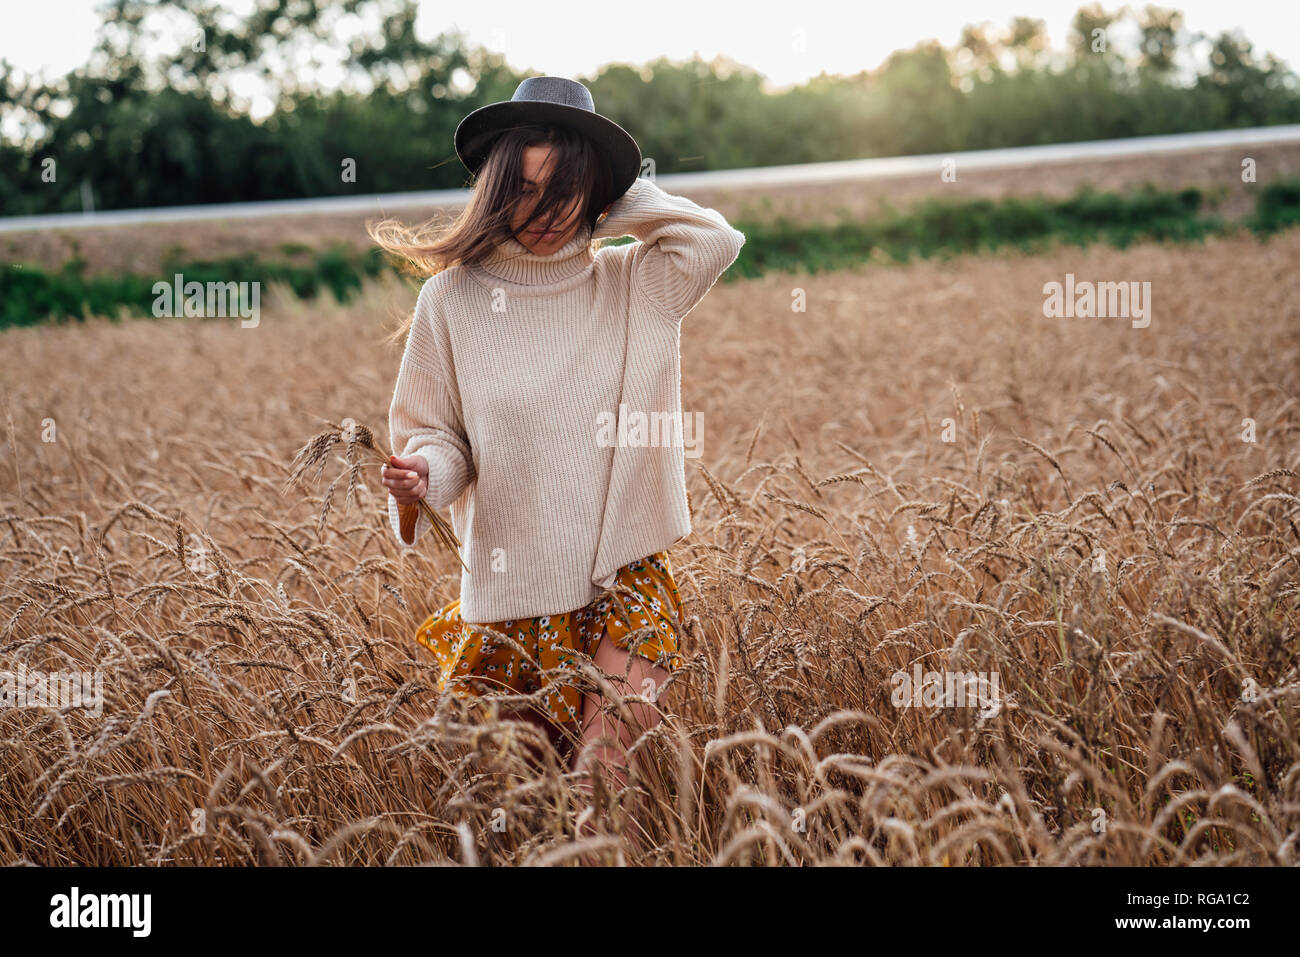 Young woman wearing hat and oversized turtleneck pullover walking in corn field Stock Photo